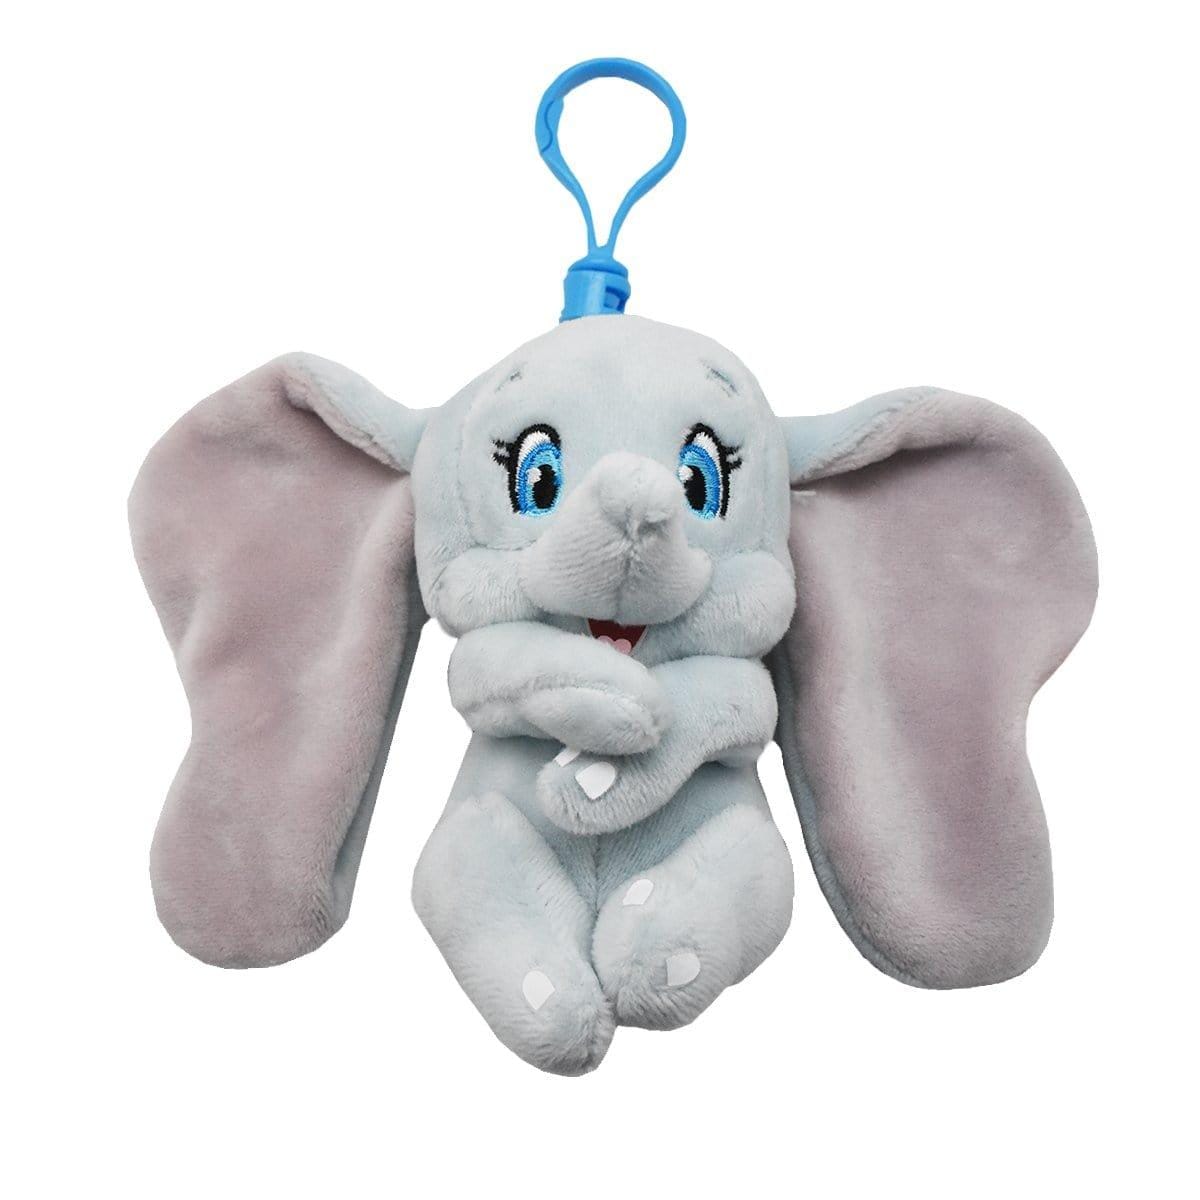 Buy Plushes Beanie Boo - Dumbo With Clip sold at Party Expert